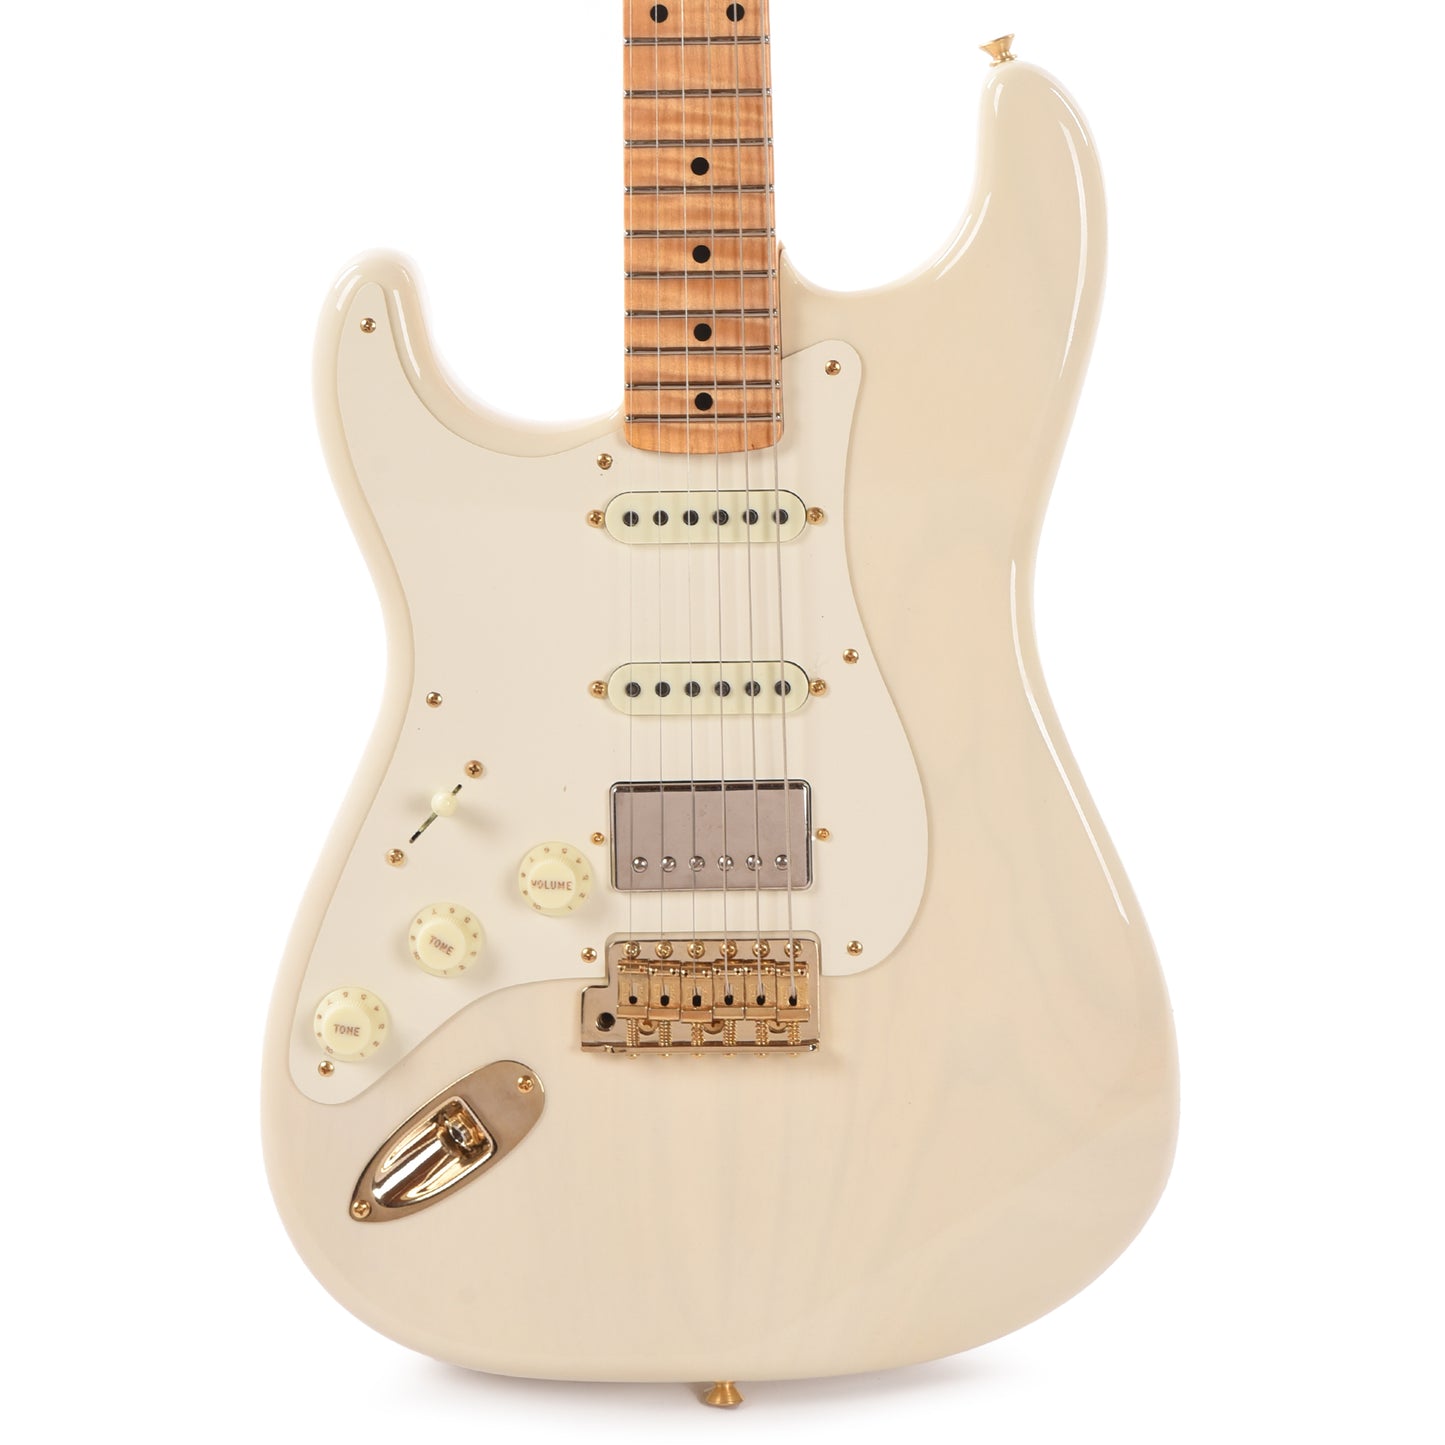 Fender Custom Shop 1957 Stratocaster HSS "Chicago Special" LEFTY Time Capsule Aged White Blonde w/3A Flame Neck & Gold Hardware